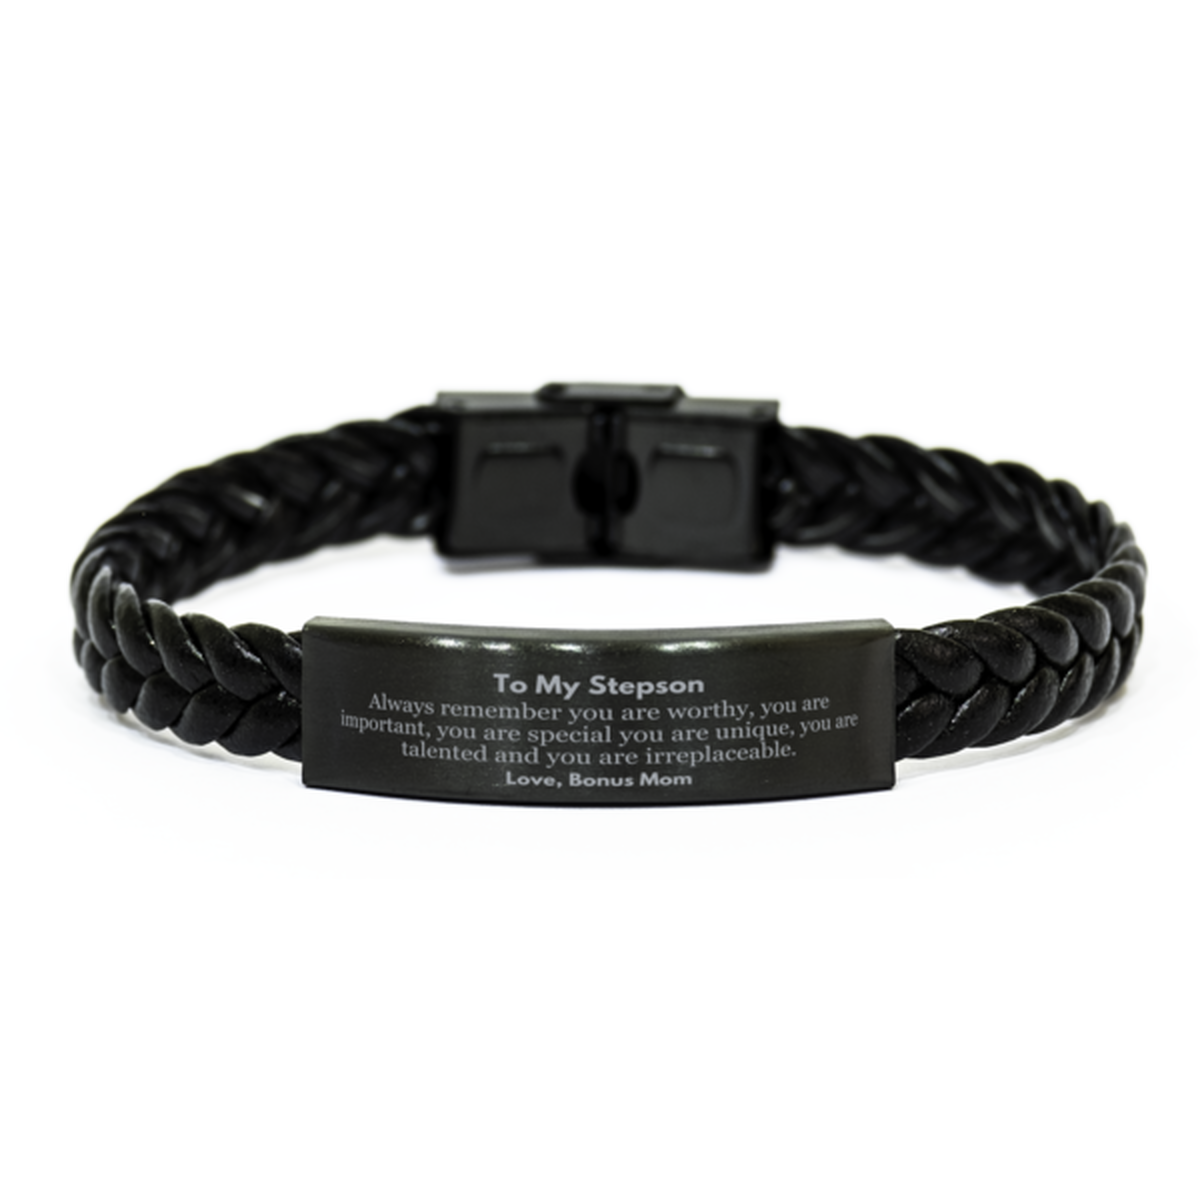 Stepson Birthday Gifts from Bonus Mom, Inspirational Braided Leather Bracelet for Stepson Christmas Graduation Gifts for Stepson Always remember you are worthy, you are important. Love, Bonus Mom